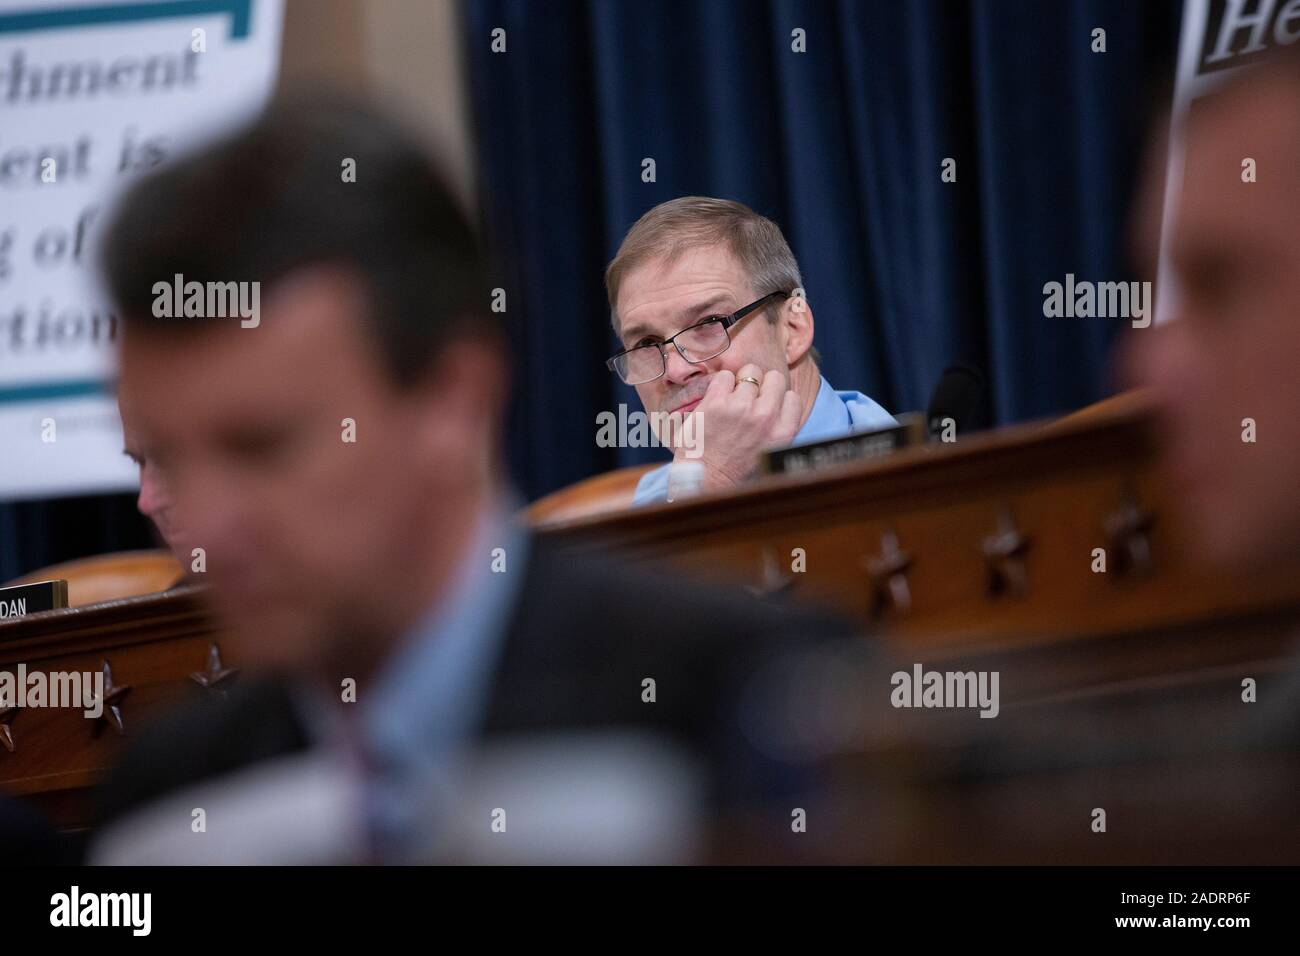 United States Representative Jim Jordan (Republican of Ohio) listens during the United States House Committee on the Judiciary hearing with constitutional law experts Noah Feldman, of Harvard University, Pamela Karlan, of Stanford University, Michael Gerhardt, of the University of North Carolina, and Jonathan Turley of The George Washington University Law School on Capitol Hill in Washington, DC, U.S. on Wednesday, December 4, 2019. Credit: Stefani Reynolds/CNP /MediaPunch Stock Photo